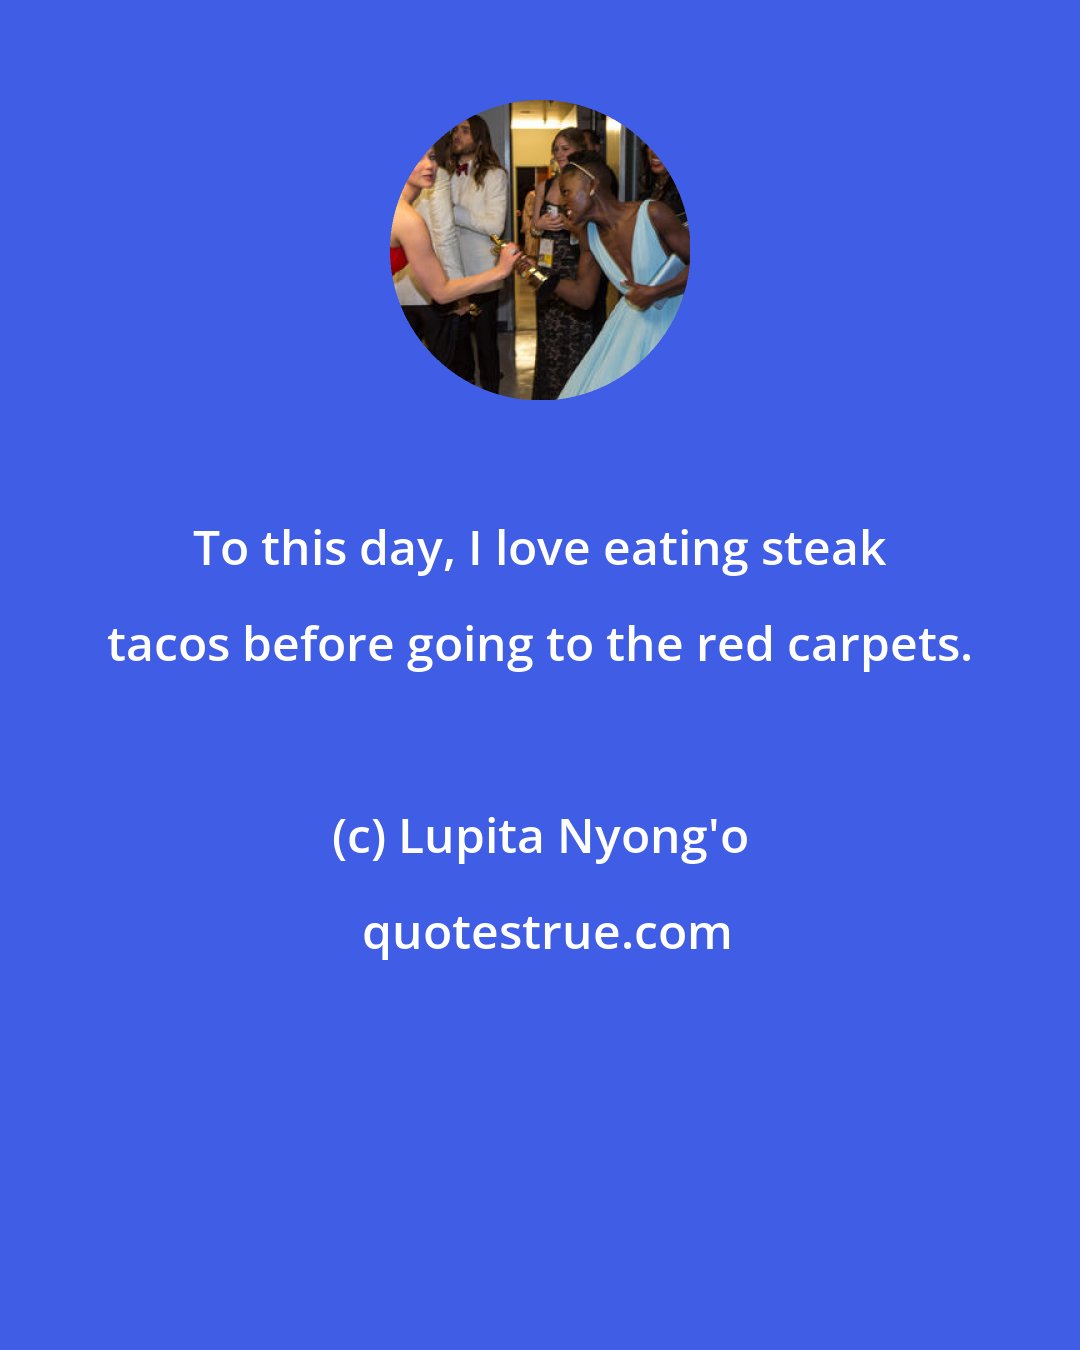 Lupita Nyong'o: To this day, I love eating steak tacos before going to the red carpets.